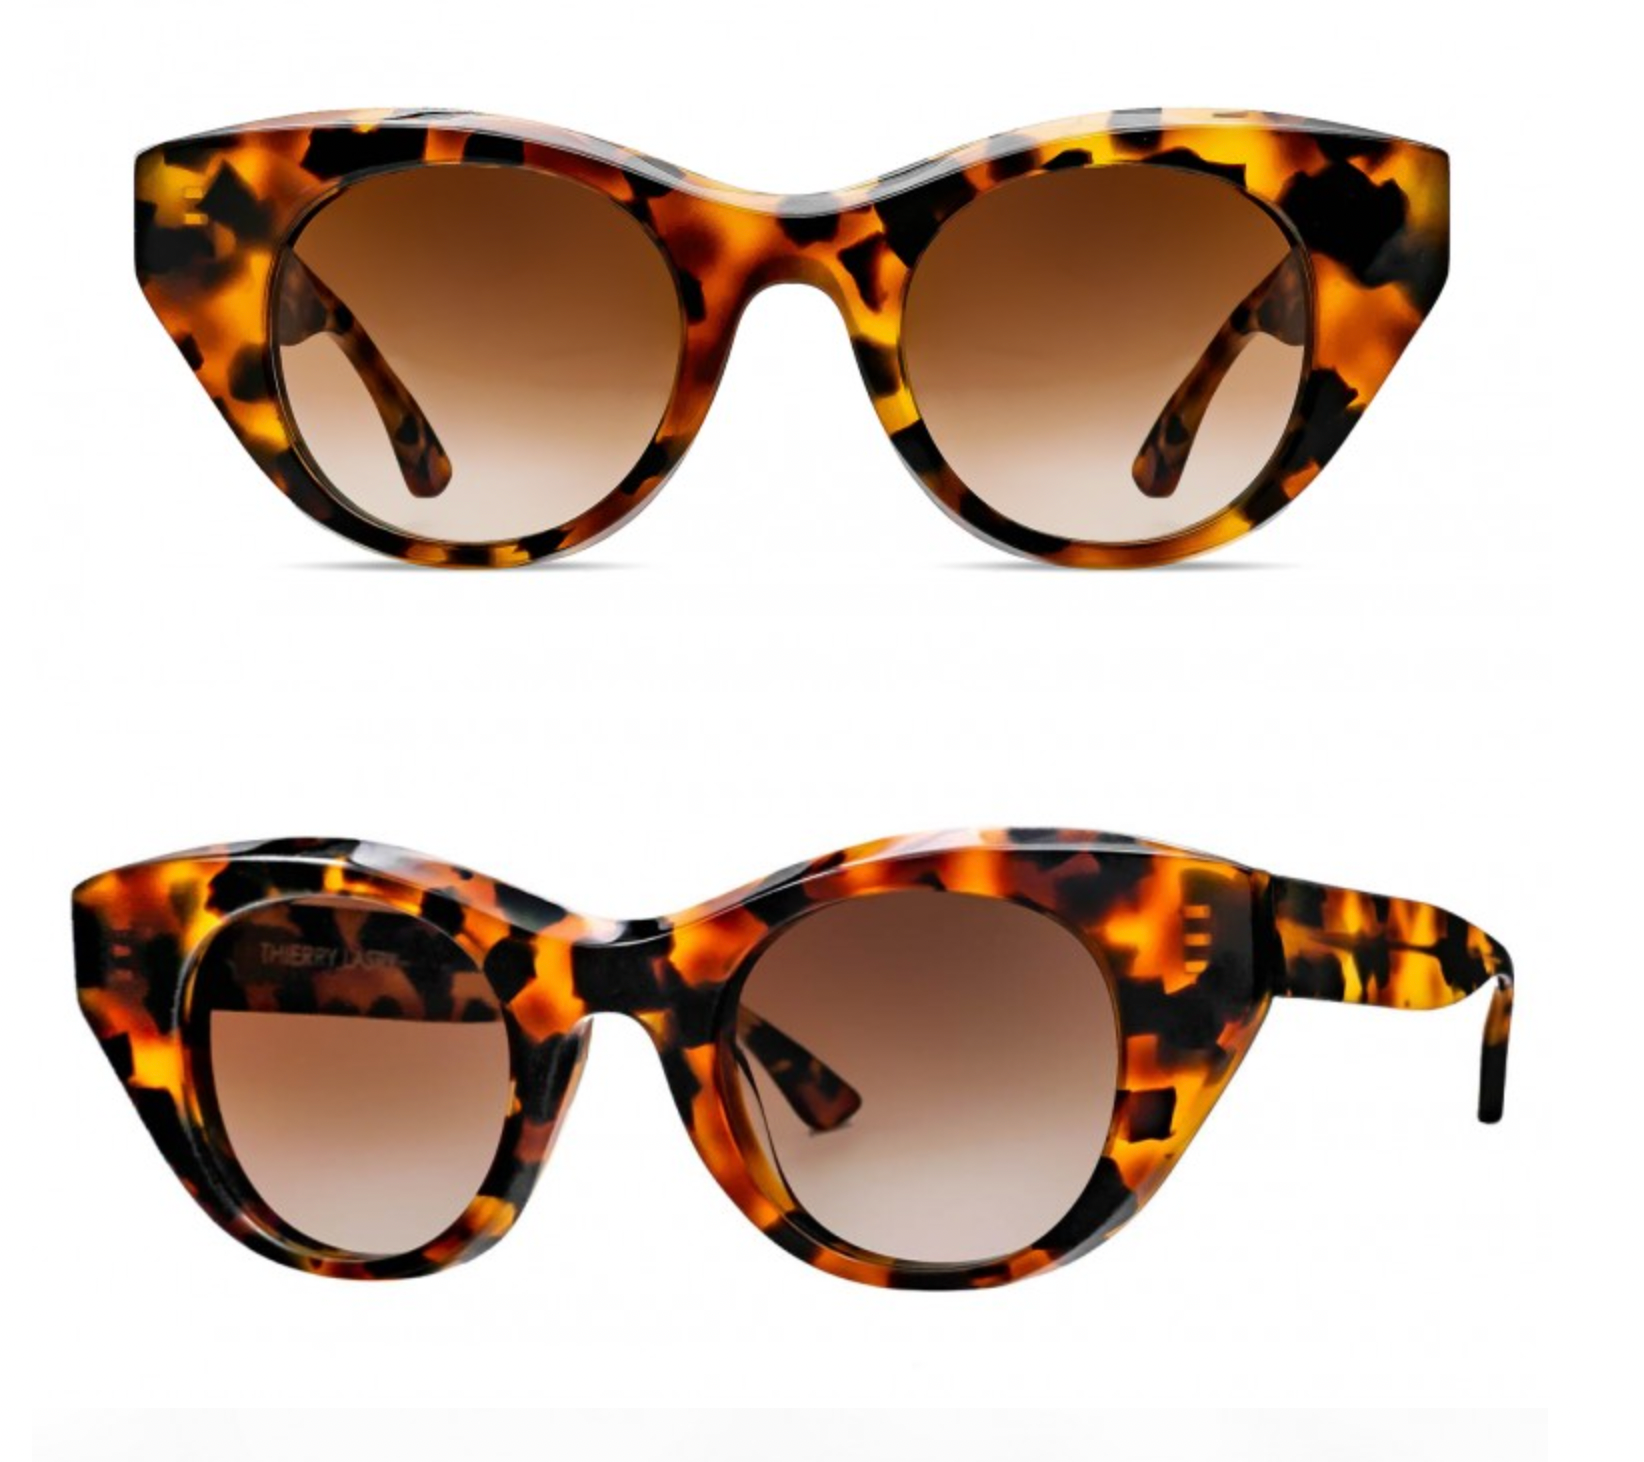 Thierry Lasry - Snappy